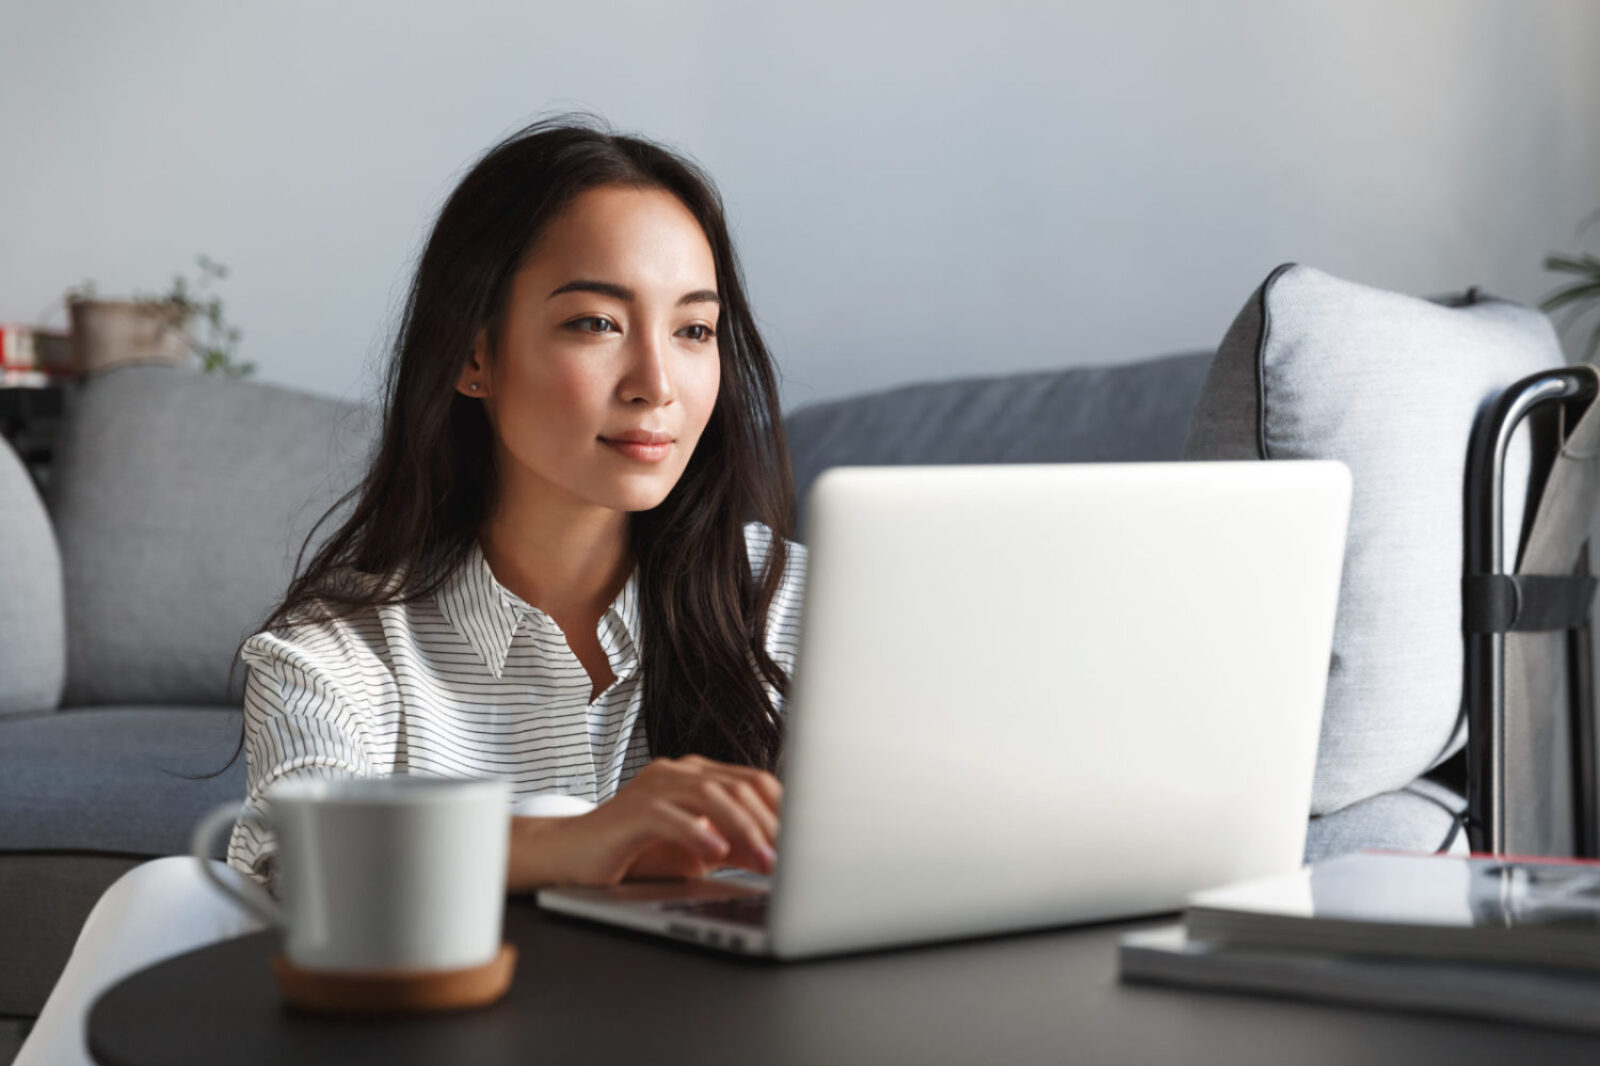 Young ambitious asian girl working remote from home, looking at laptop screen and smiling. Woman checking mail or researching while telecommuting, sitting on floor at her apartment.